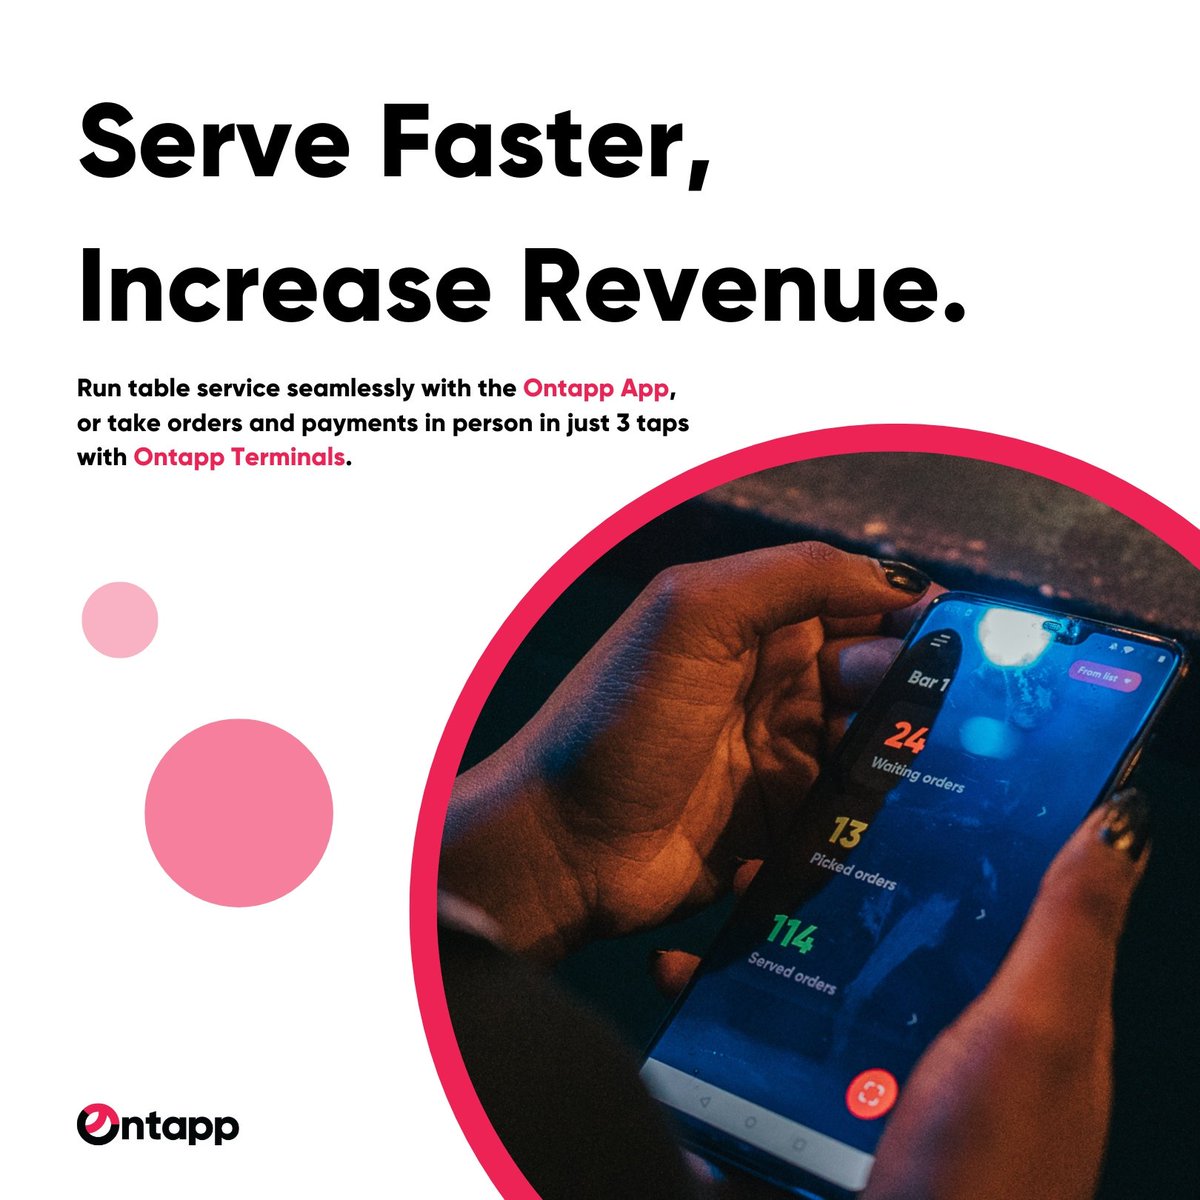 Serve Faster & Increase Revenue with Ontapp 🫰🏼🫰🏼🫰🏼⁠
⁠
#Ontapp #app #startup #ukhospitality #tableservice #ukpub #latenighteconomy #venue #hospitality #cashflow #business #contactlesspayment #appstore #customerservice #events #applepay #googlepay